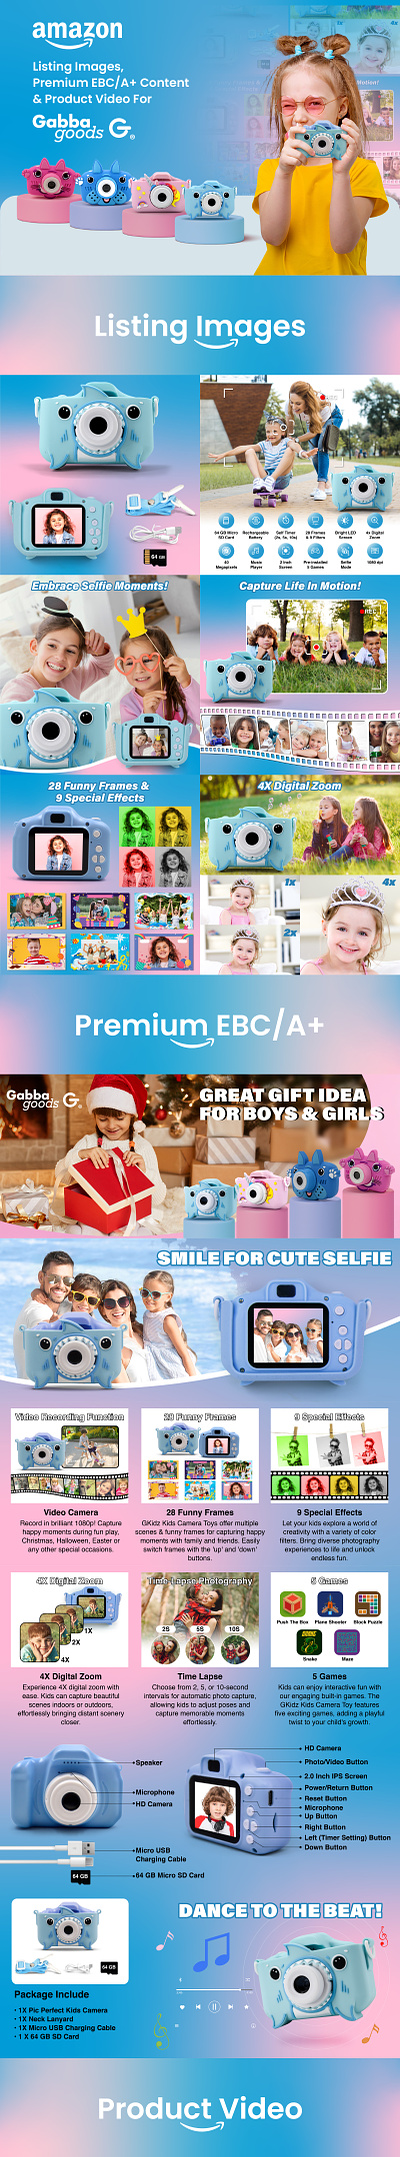 Listing Image, EBC/Product Video for kids Camera a listing amazon amazon a amazon a listing amazon ebc amazon ebc listing amazon listing amazon product ebc ebc a ebc listing ebc product product design